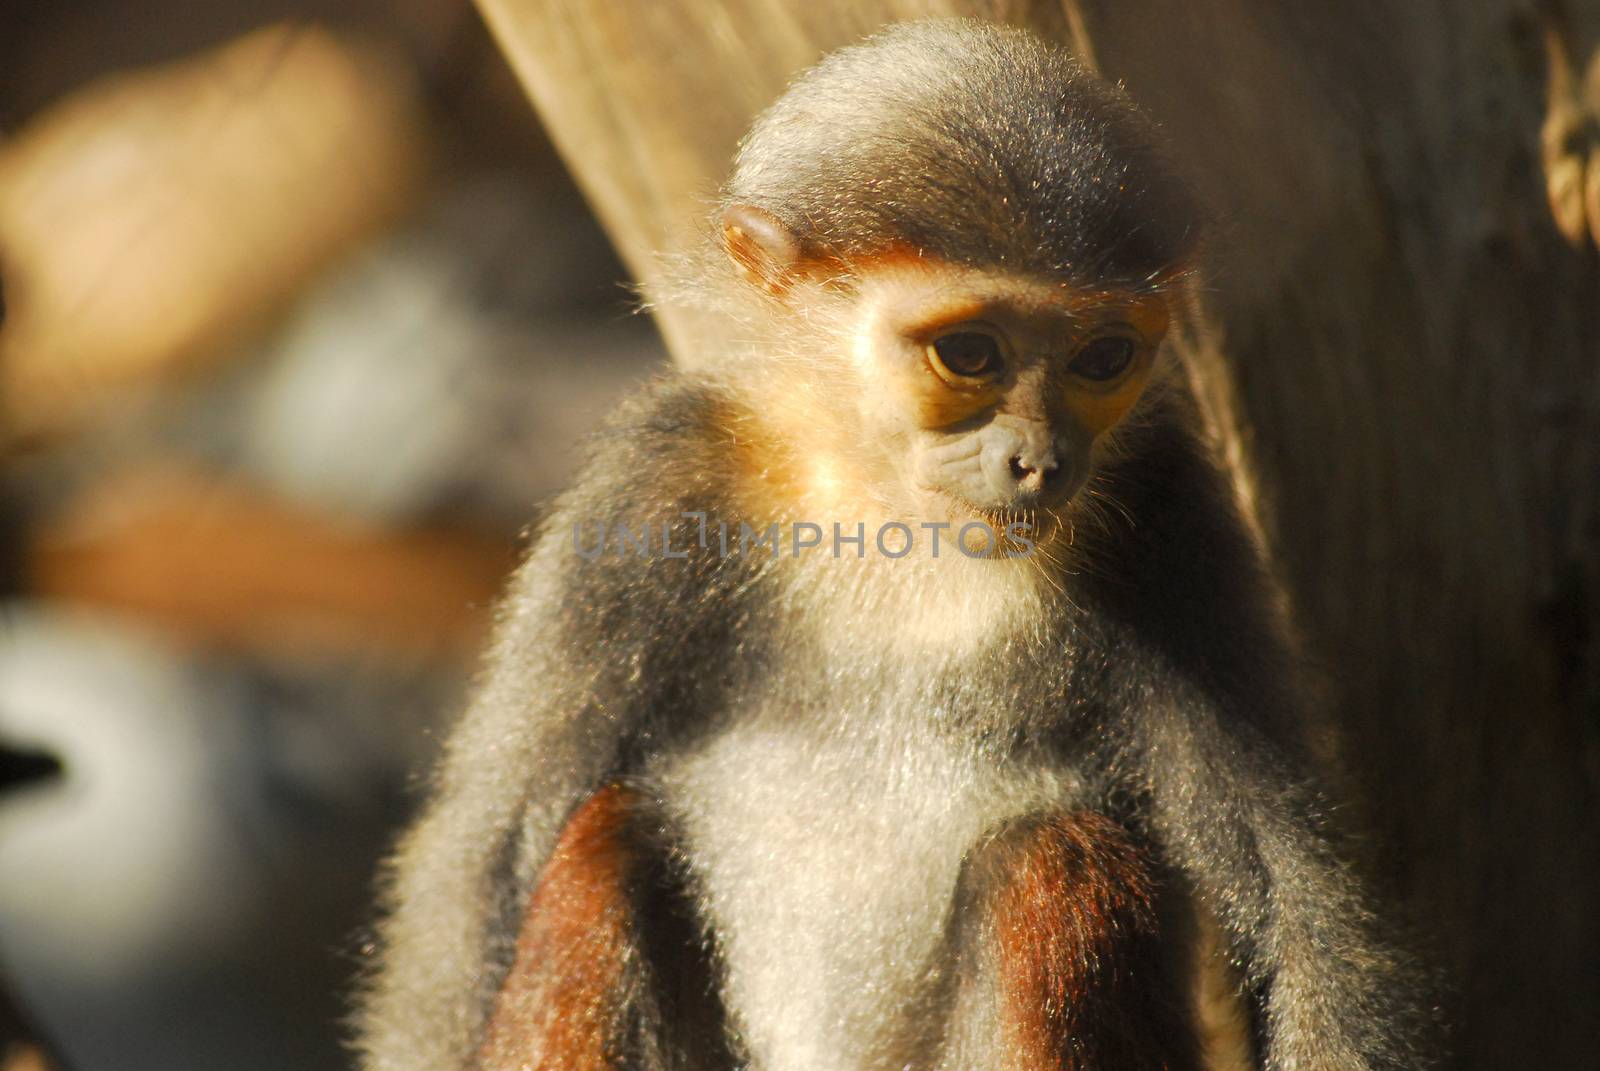 Macaque in a cage at the Zoo, Thailand by think4photop